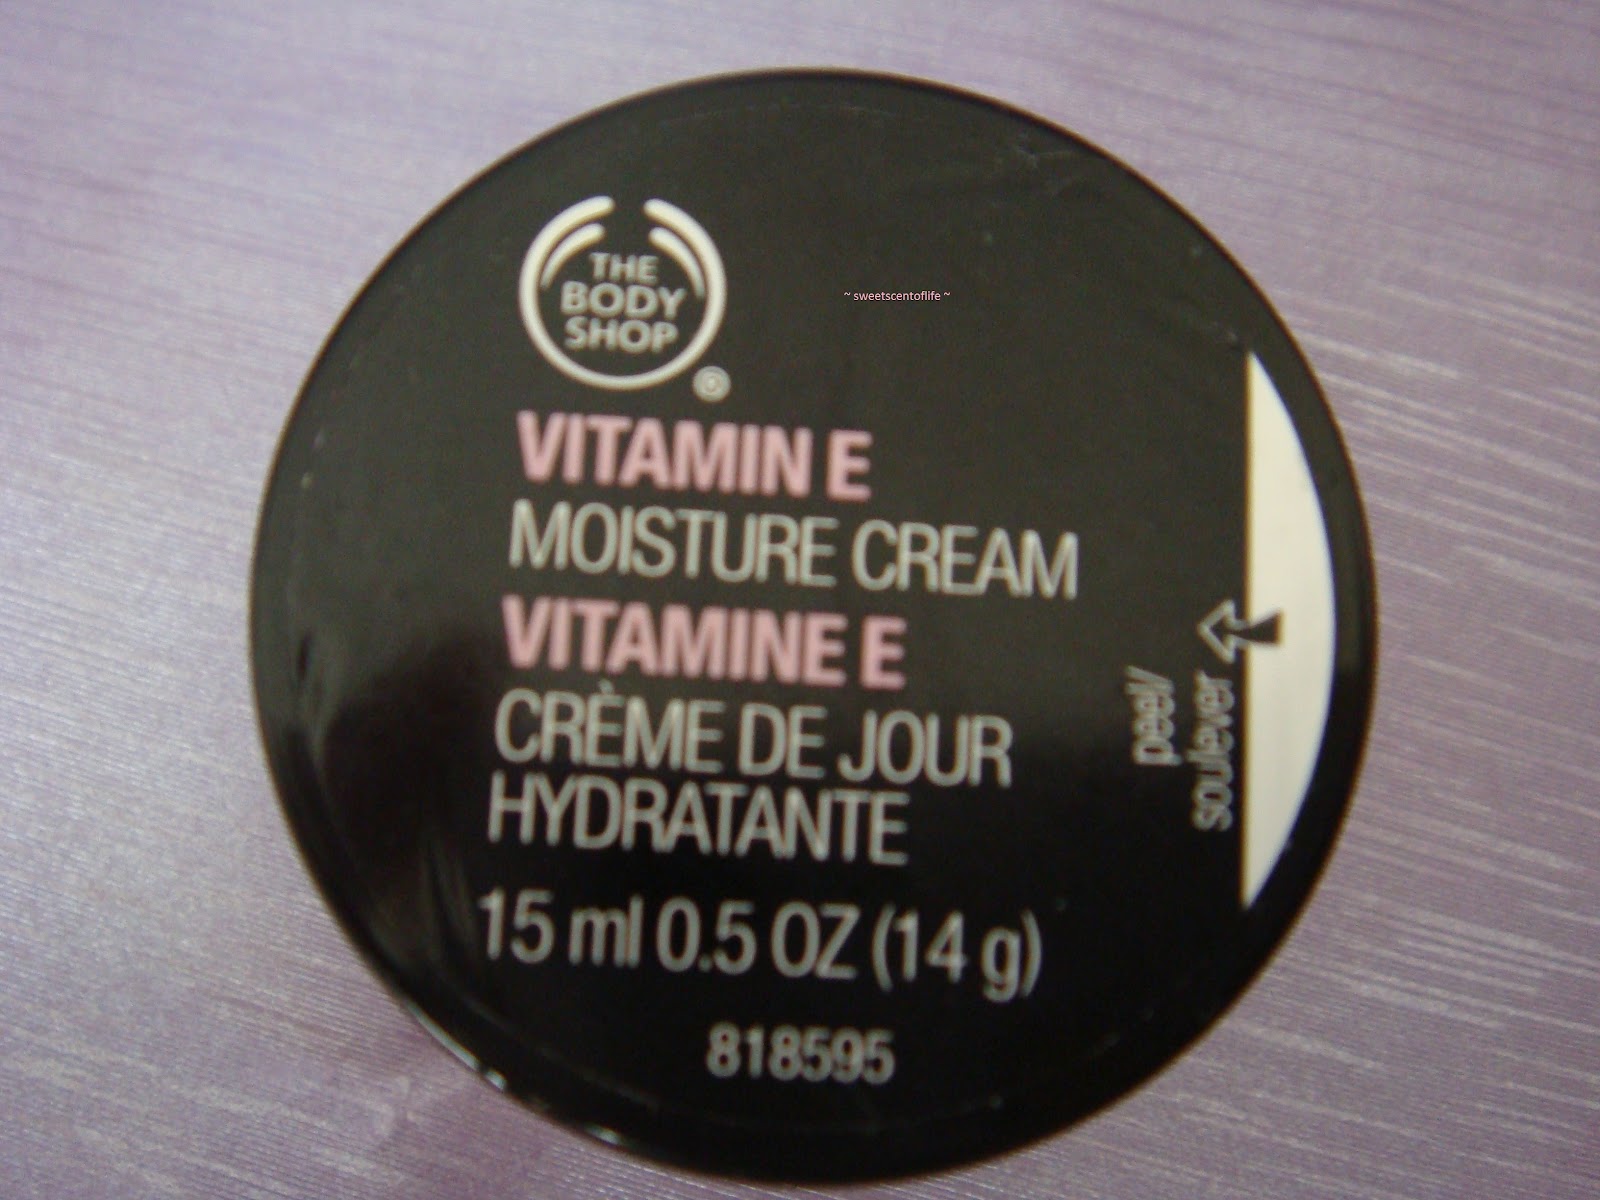 Sweet Scent Of Life Review The Body Shop Vitamin E